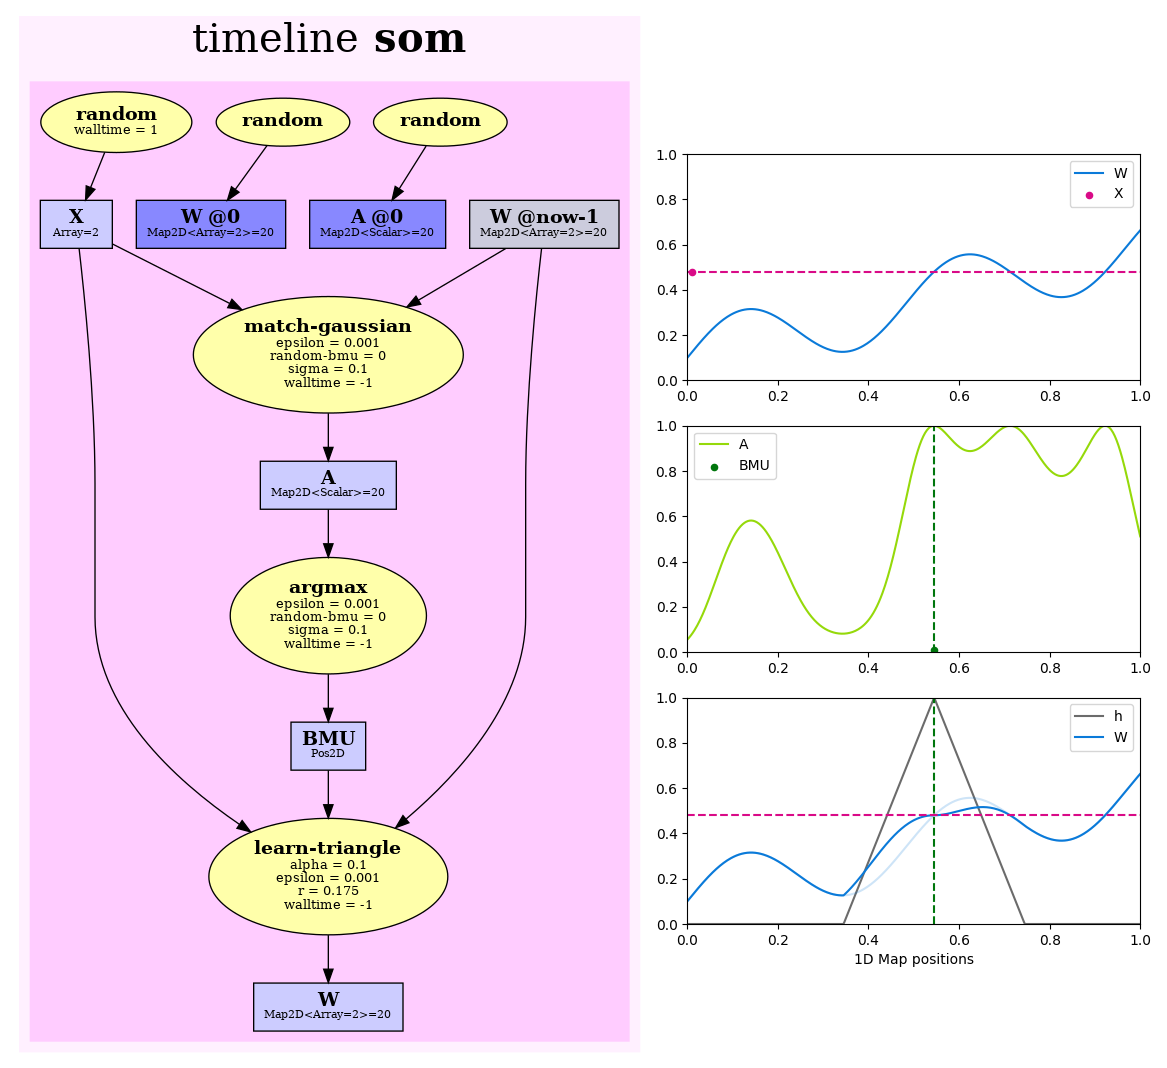 Left: The SOM updating rules. Right: Illustration of the process on a 1D SOM